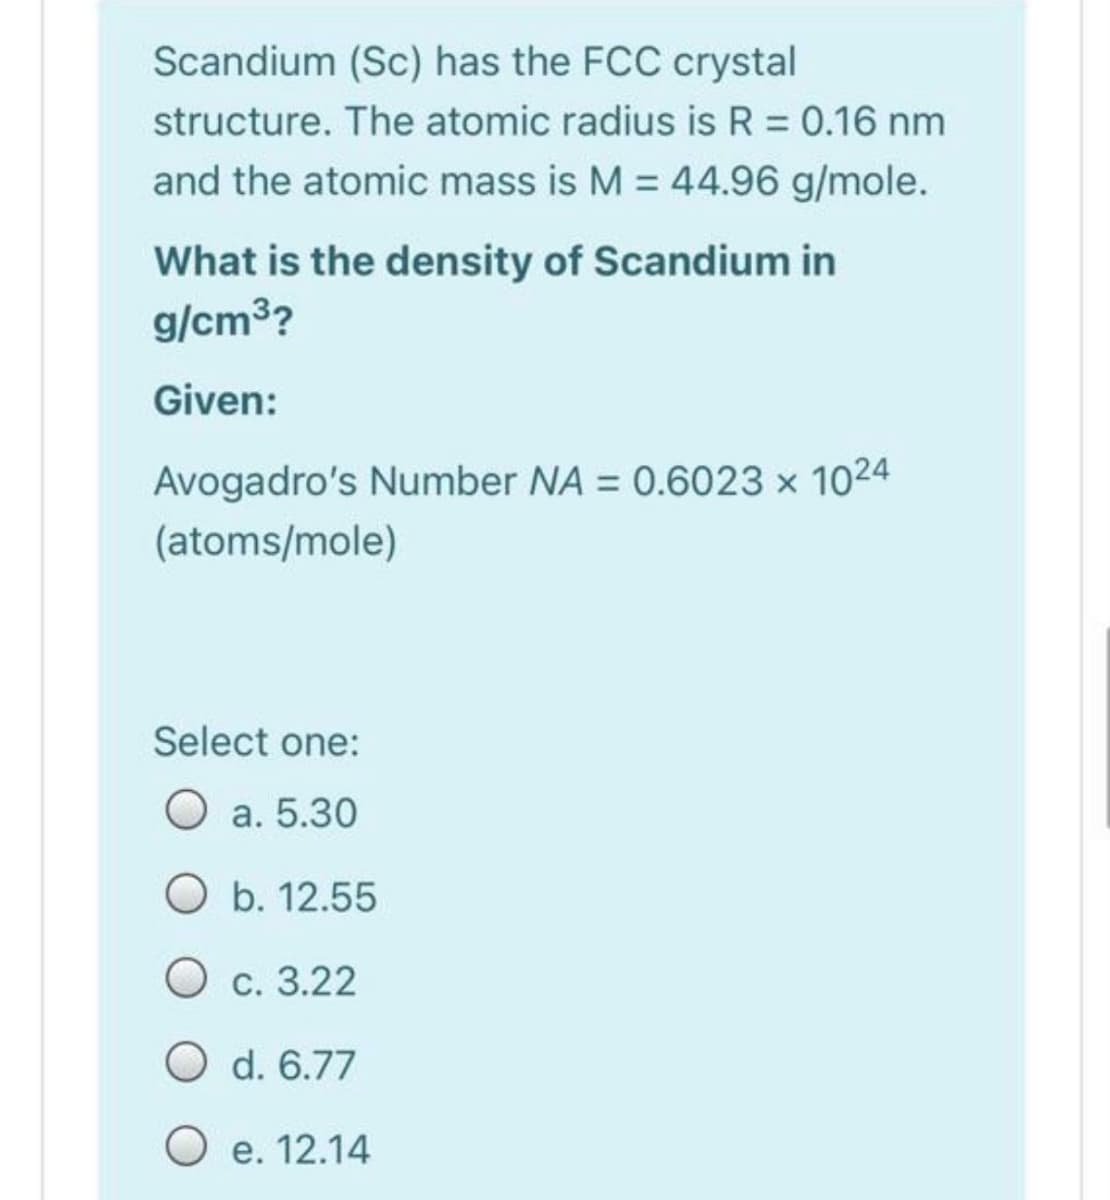 Scandium (Sc) has the FCC crystal
structure. The atomic radius is R = 0.16 nm
and the atomic mass is M = 44.96 g/mole.
What is the density of Scandium in
g/cm3?
Given:
Avogadro's Number NA = 0.6023 x 1024
(atoms/mole)
Select one:
O a. 5.30
O b. 12.55
О с. 3.22
O d. 6.77
О е. 12.14
